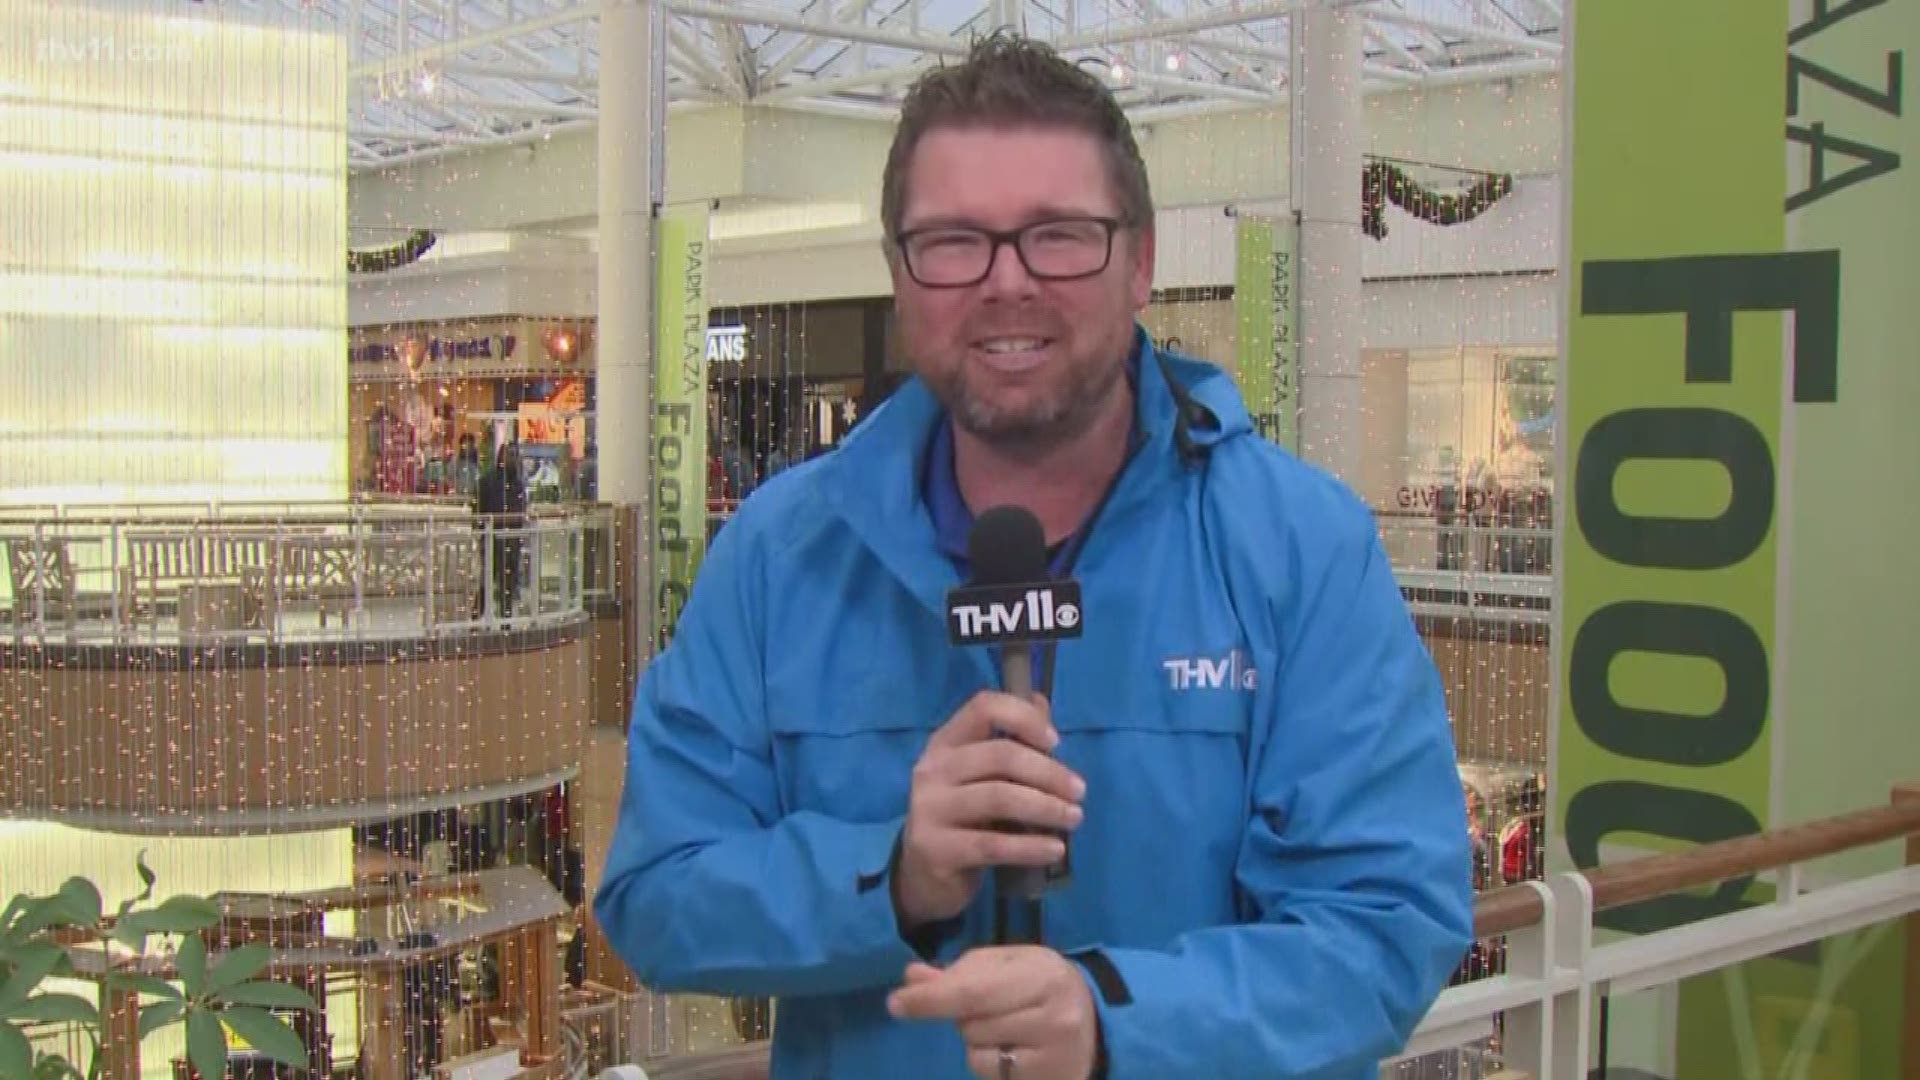 Adam Bledsoe is talking about the crowds and expectations for Black Friday at Park Plaza Mall.